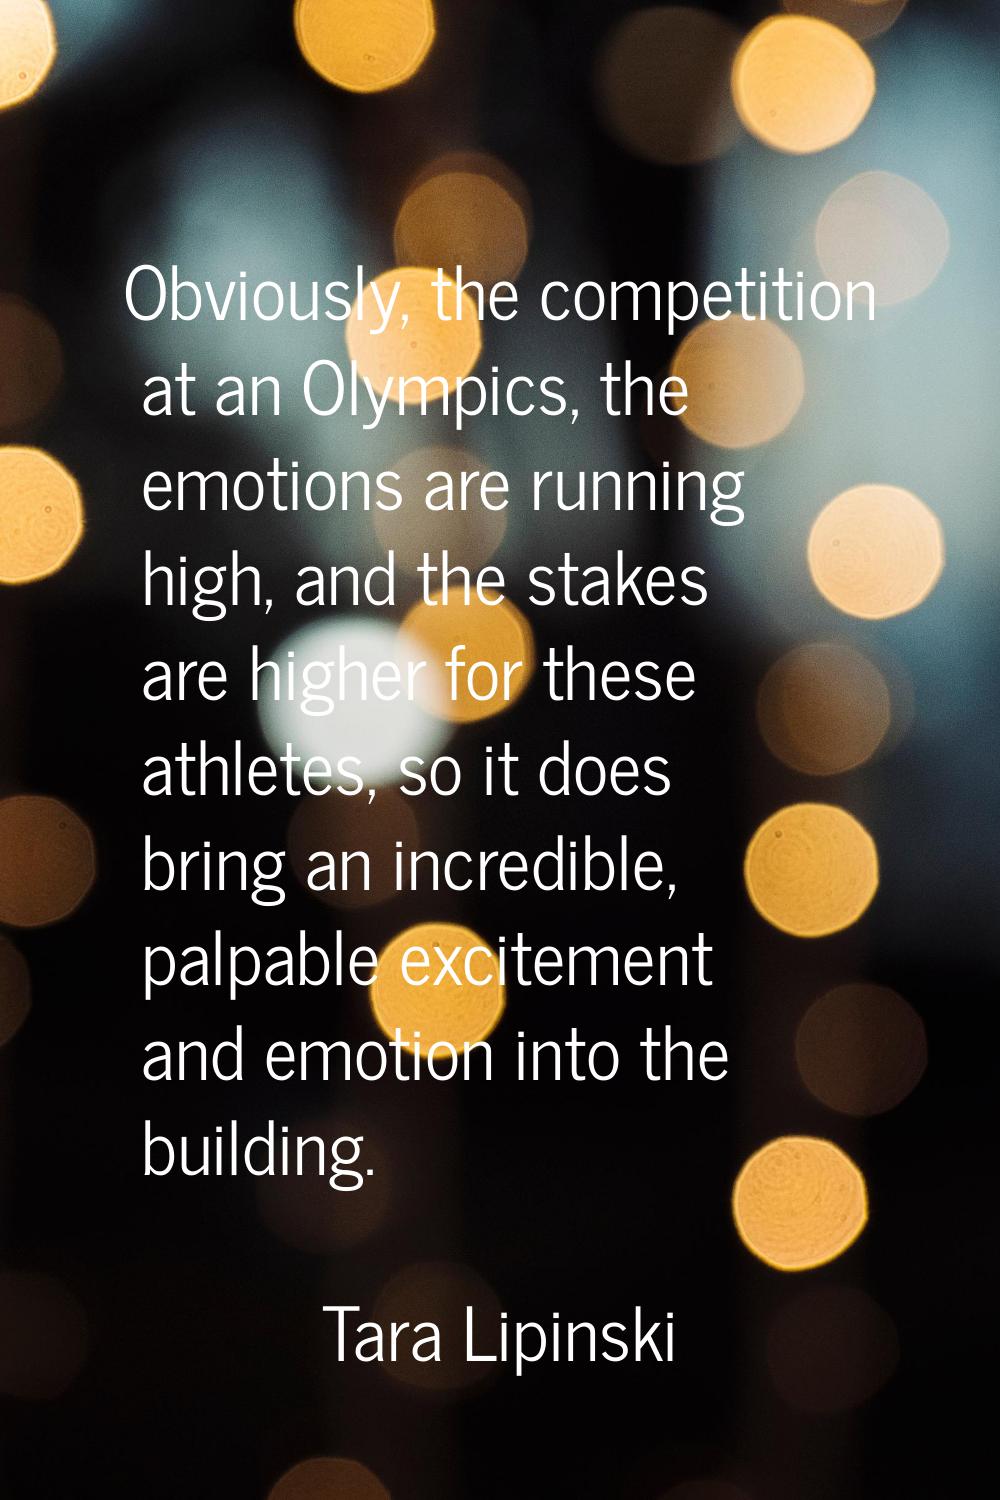 Obviously, the competition at an Olympics, the emotions are running high, and the stakes are higher